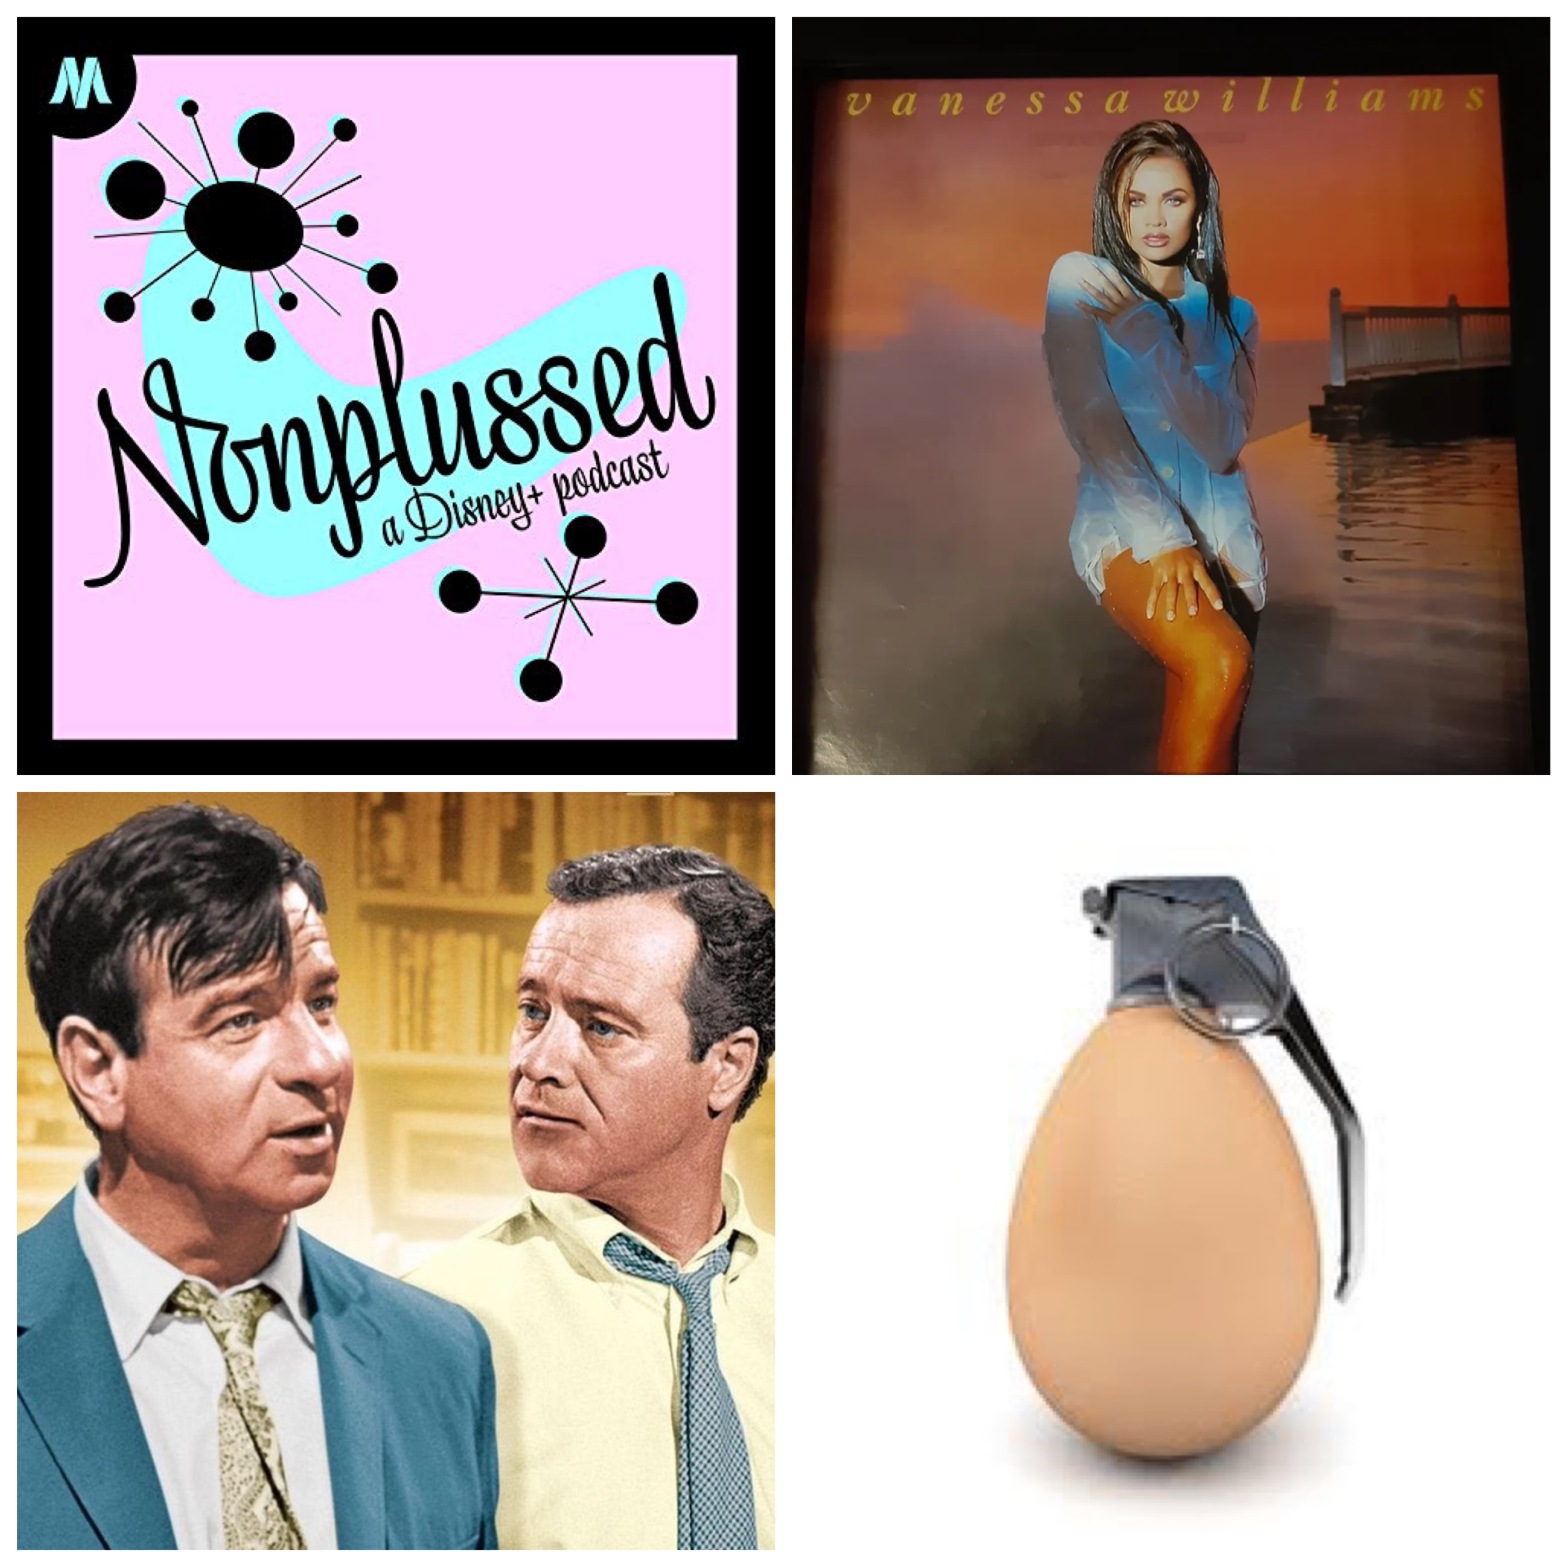 The Nonplussed Podcast logo. A Vanessa Williams poster. The DVD art for The Odd Couple movie. A grenade that's also an egg.